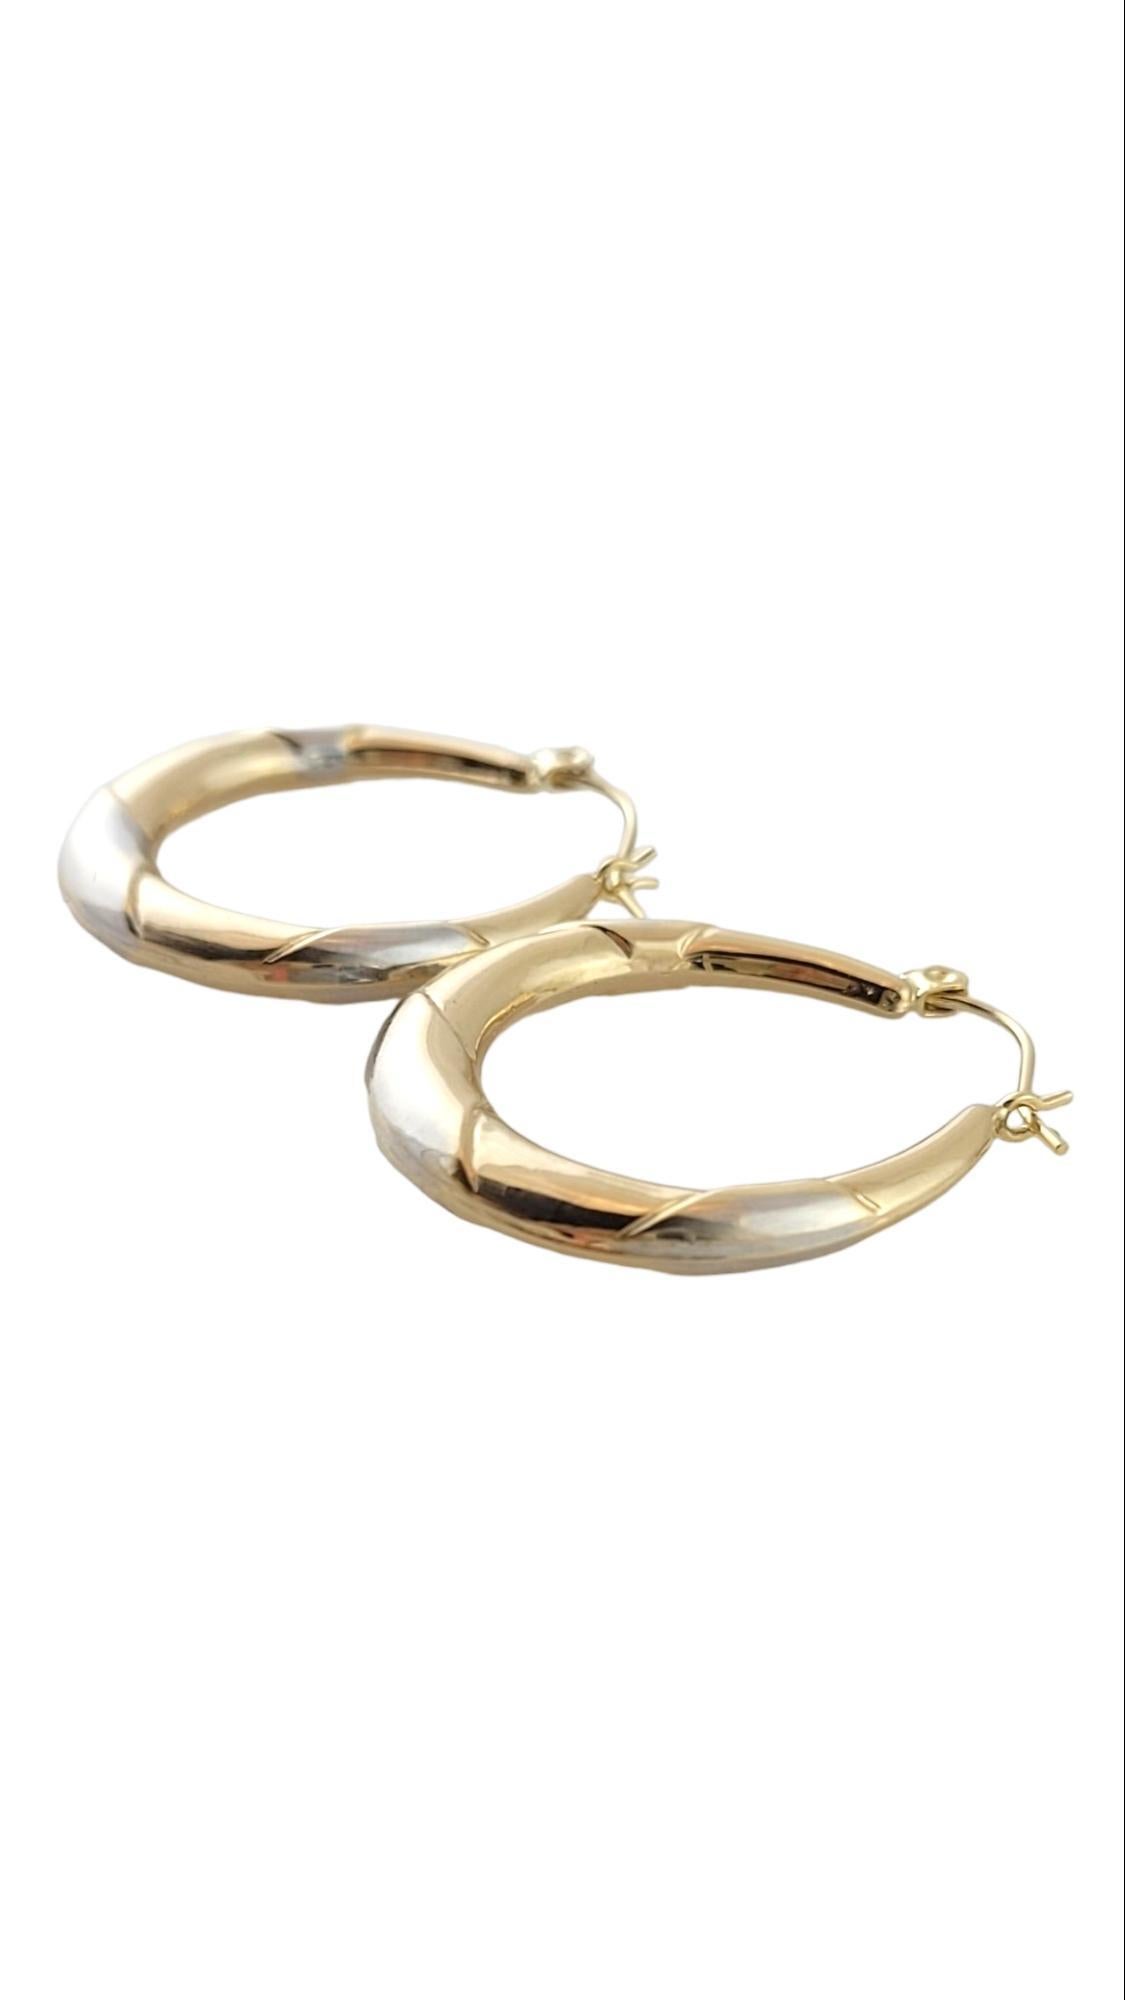  14K Yellow & White Gold Two Tone Hoops

This gorgeous set of two tone hoops are crafted from both 14K white and yellow gold for a beautiful finish!

Size: 29.1mm X 27.0mm X 4.2mm

Weight: 2.55 g/ 1.6 dwt

Hallmark: SLC 14K

Very good condition,